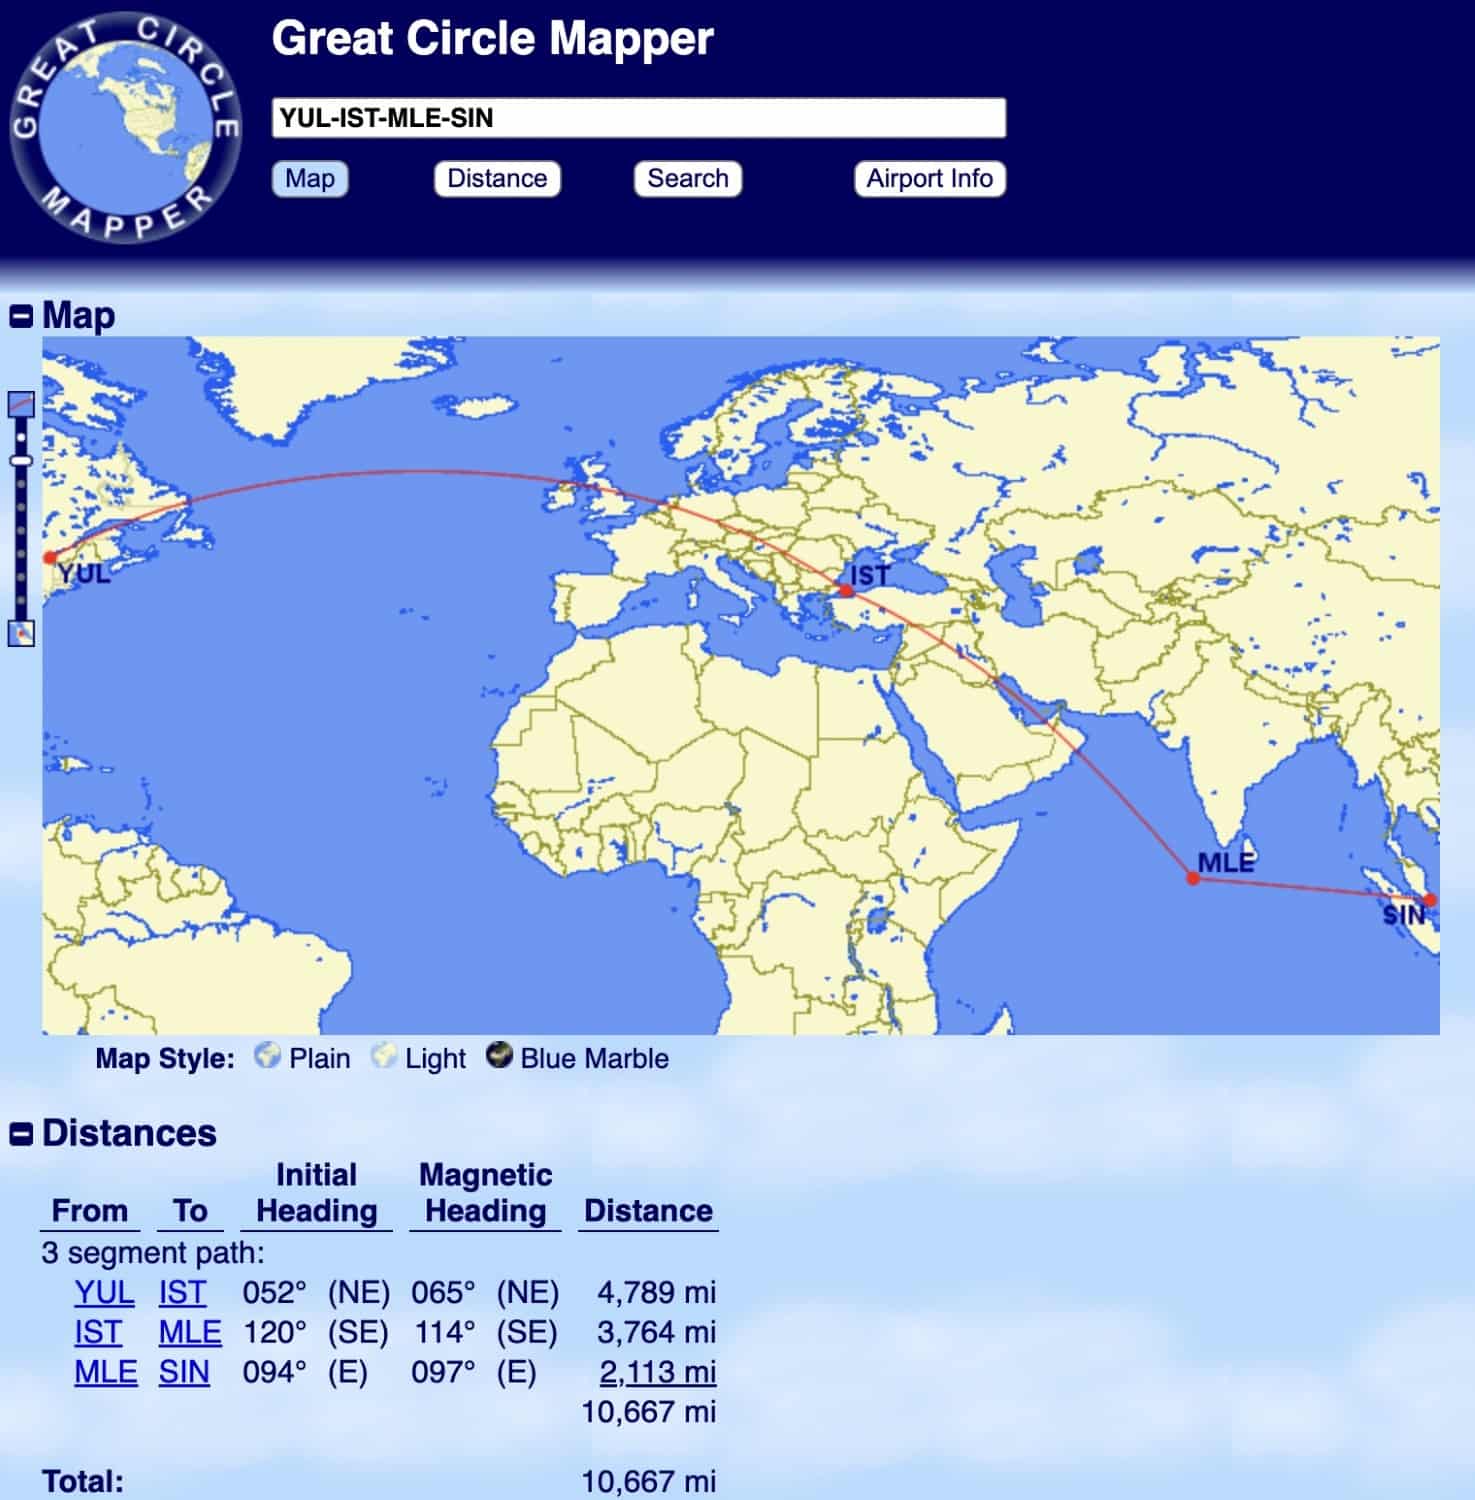 montreal to istanbul to maldives to singapore distance on great circle mapper